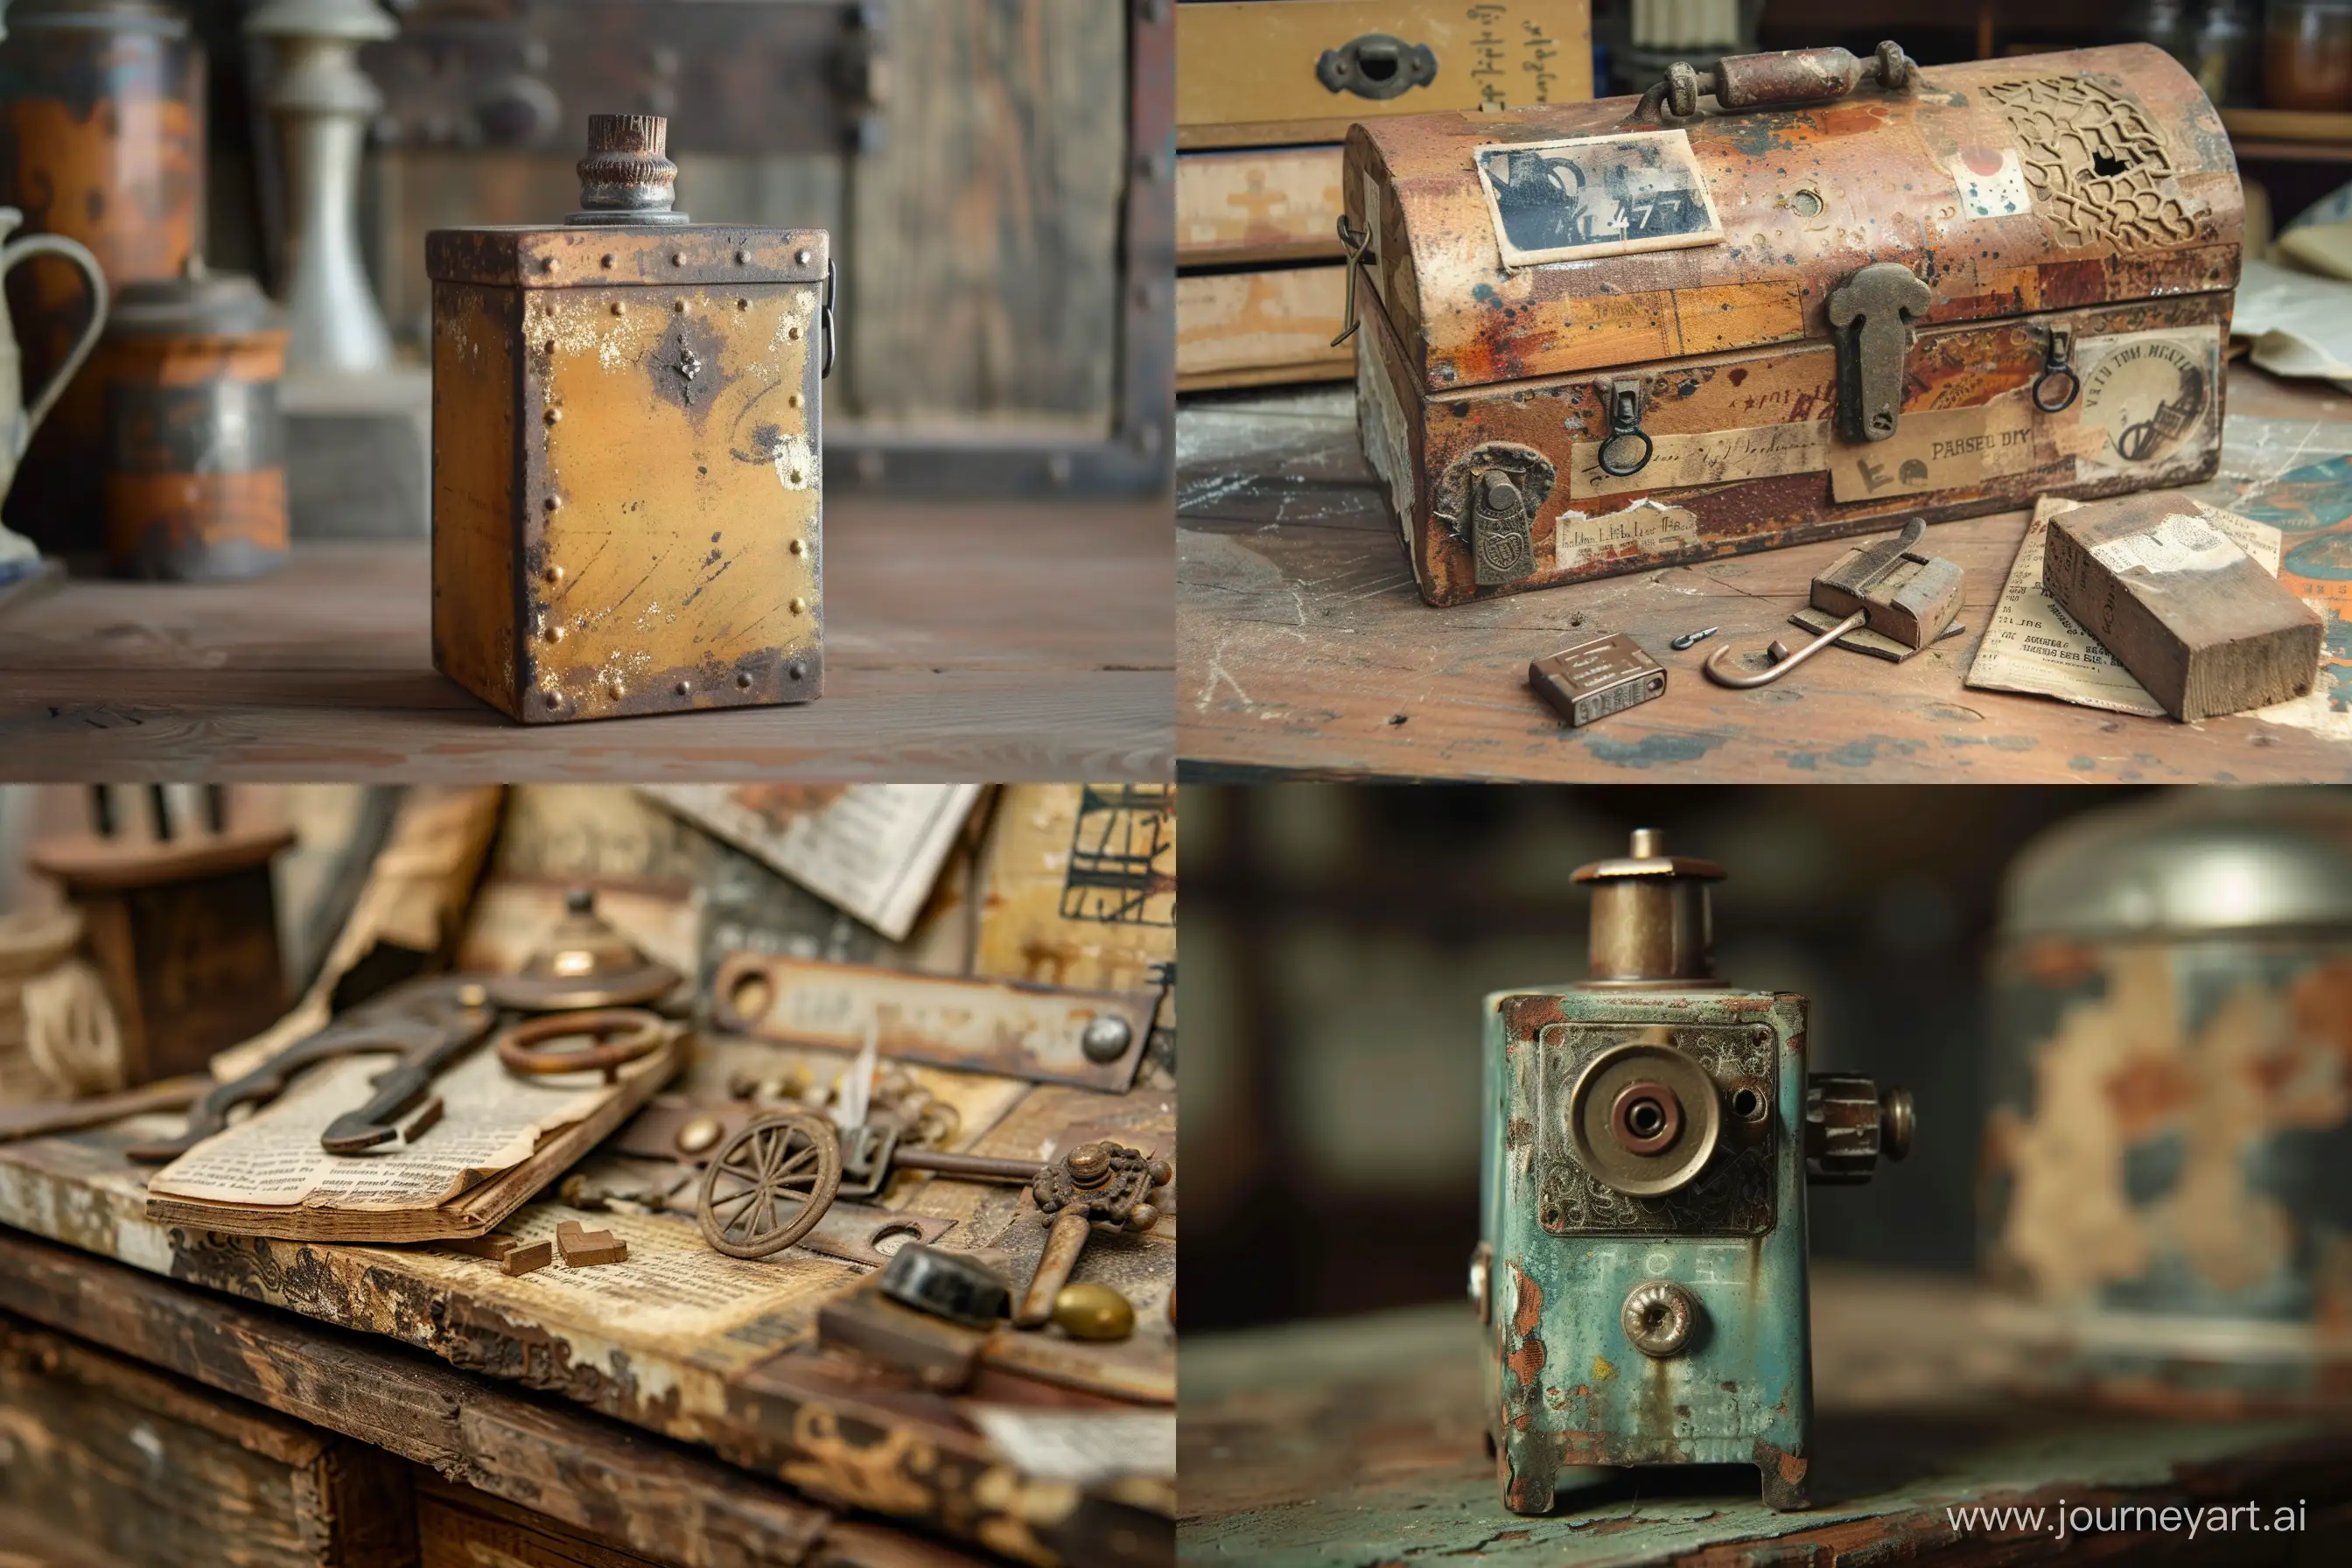 Vintage-Object-Collection-by-Tim-Holtz-Assorted-Vintage-Finds-Displayed-in-Warm-Lighting